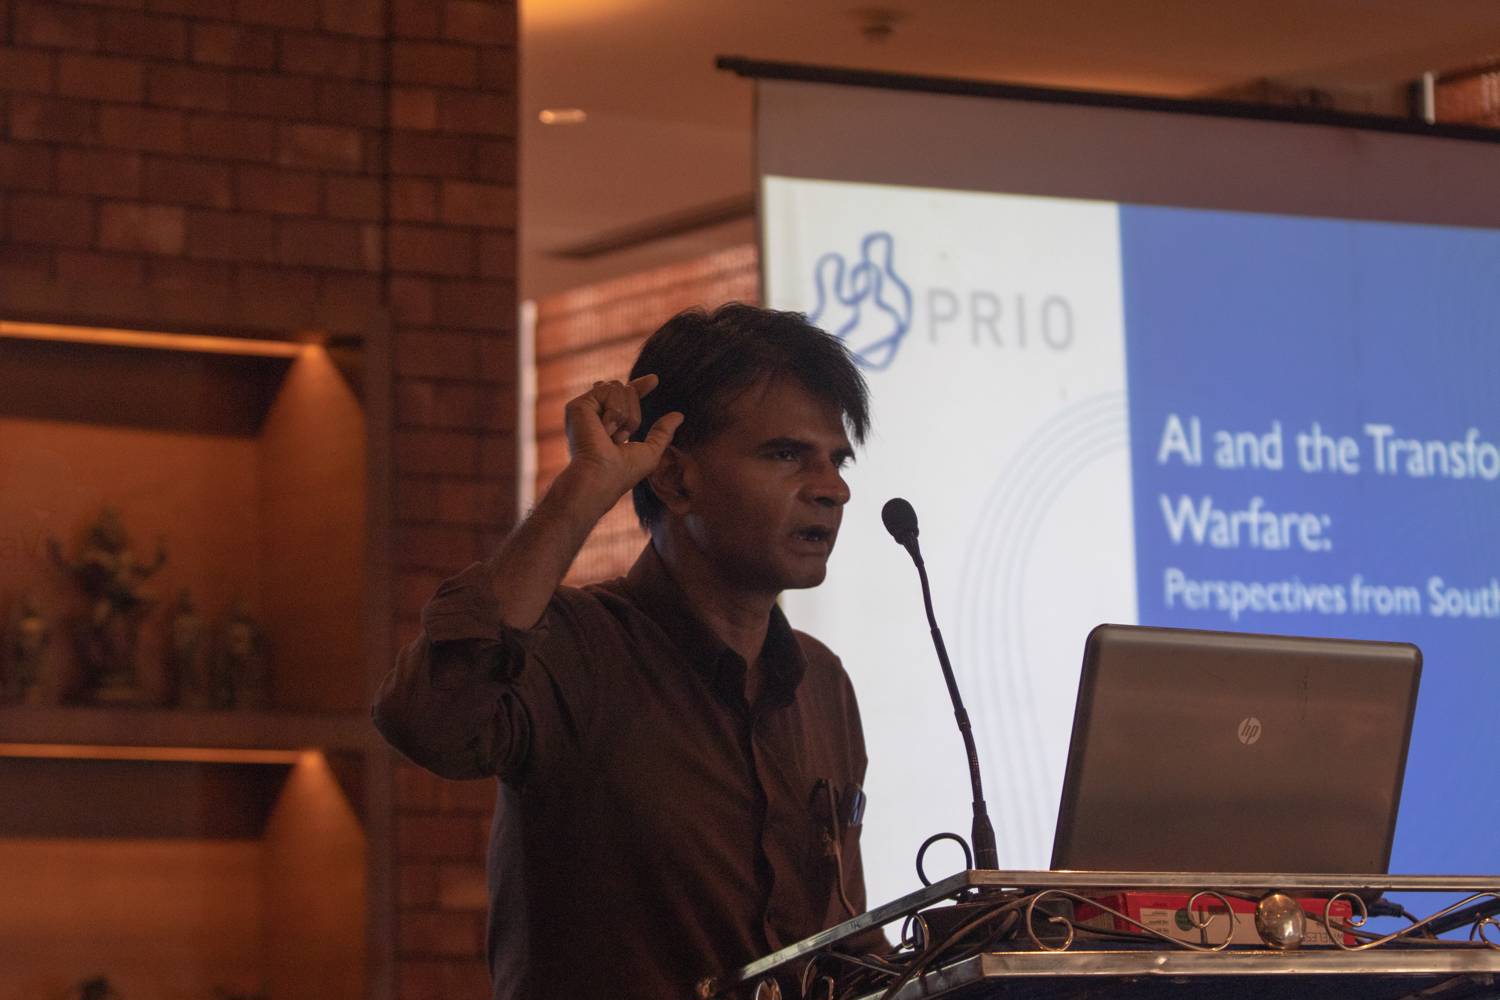 PRIO Global Fellow Kaushik Roy presenting at the conference.